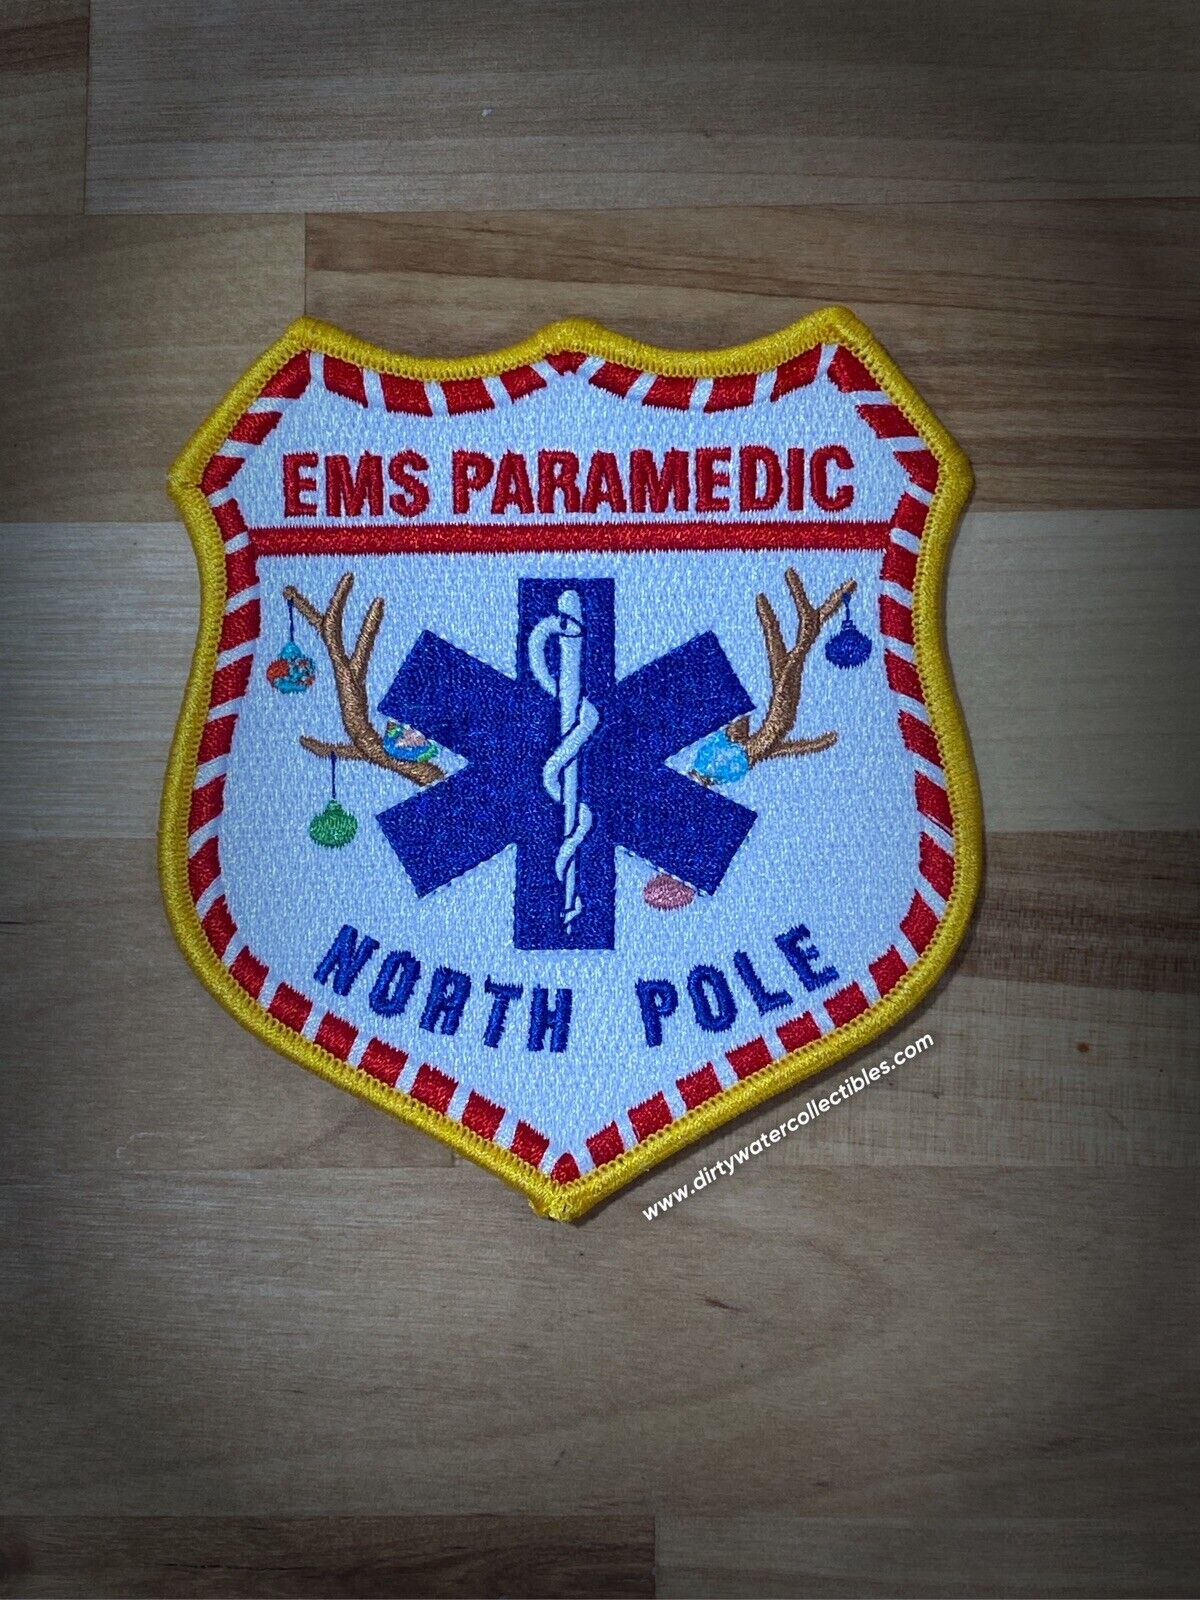 NORTH POLE EMS PARAMEDIC PATCH NEW